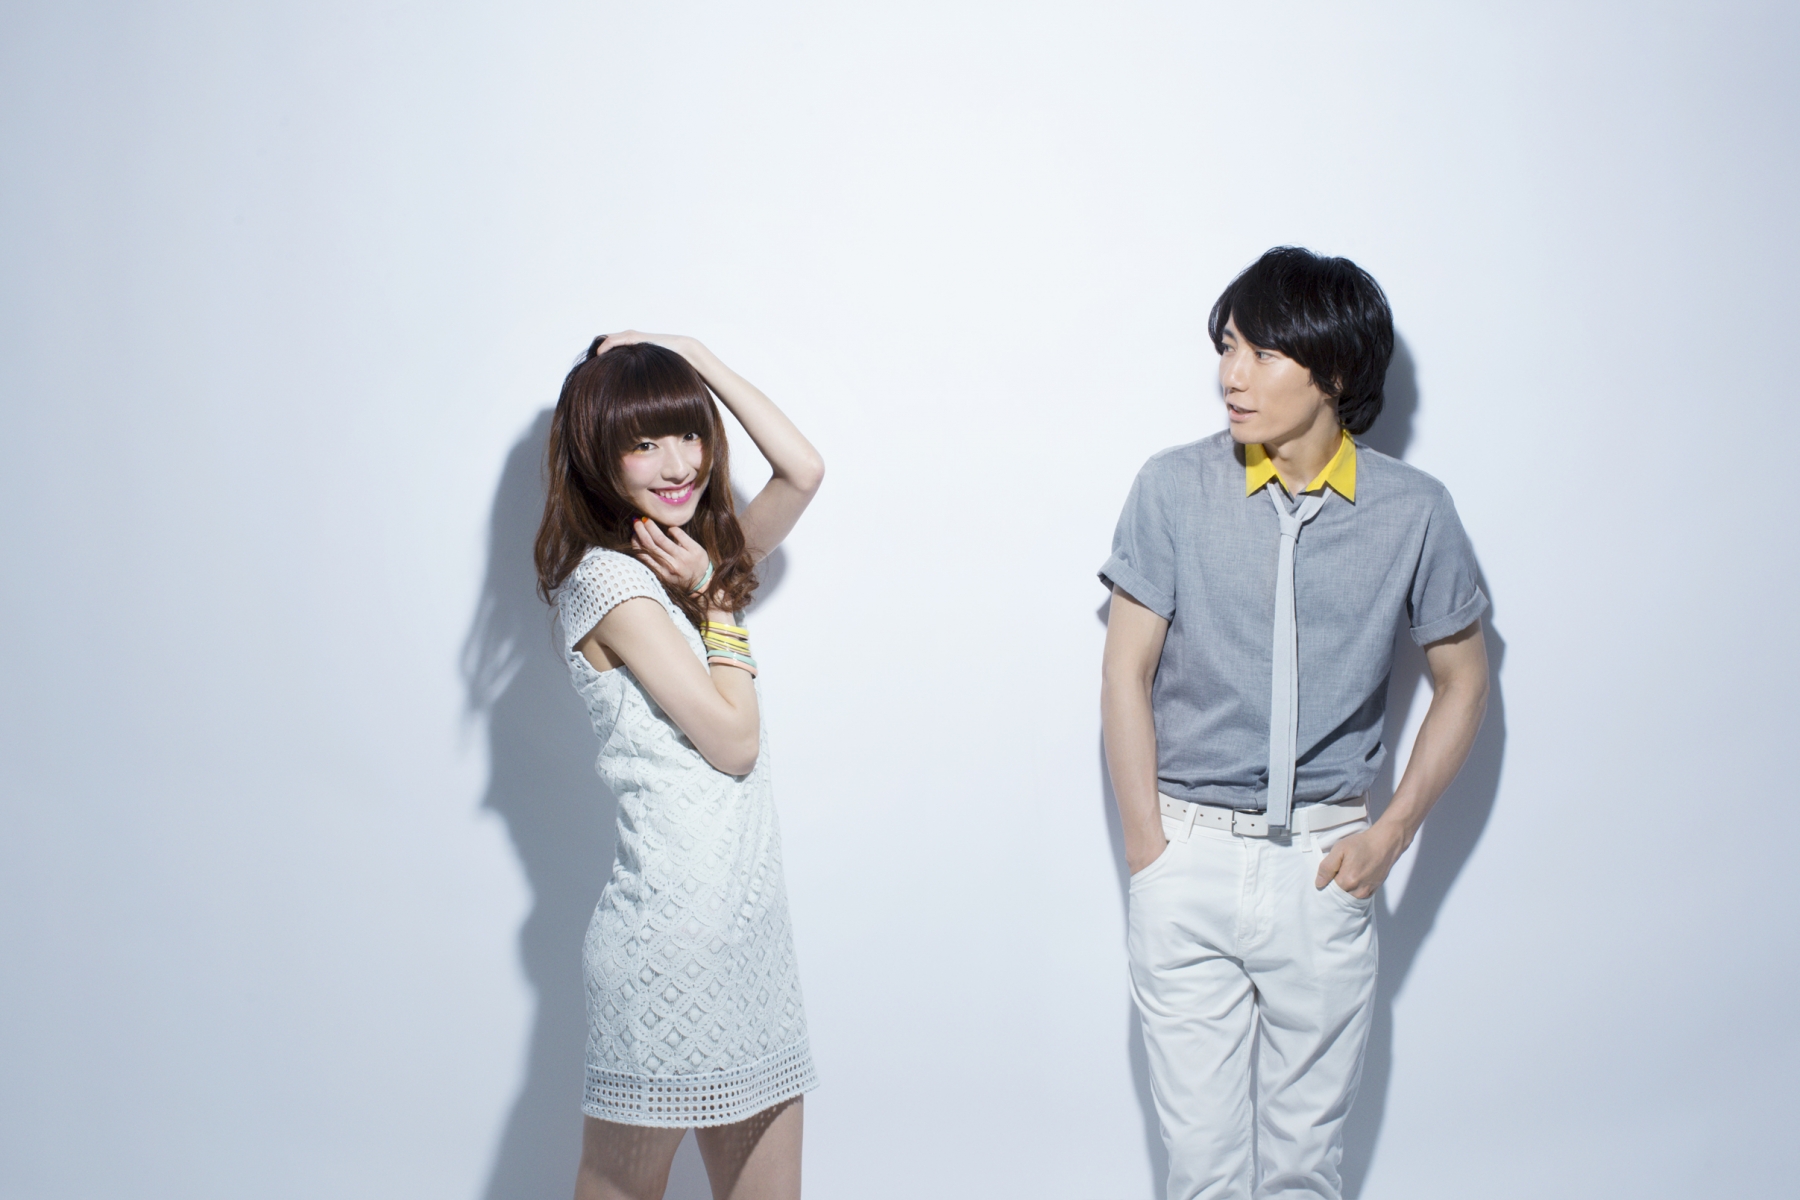 moumoon’s New Song “BF” to be Featured on “Dear Sister” Drama!